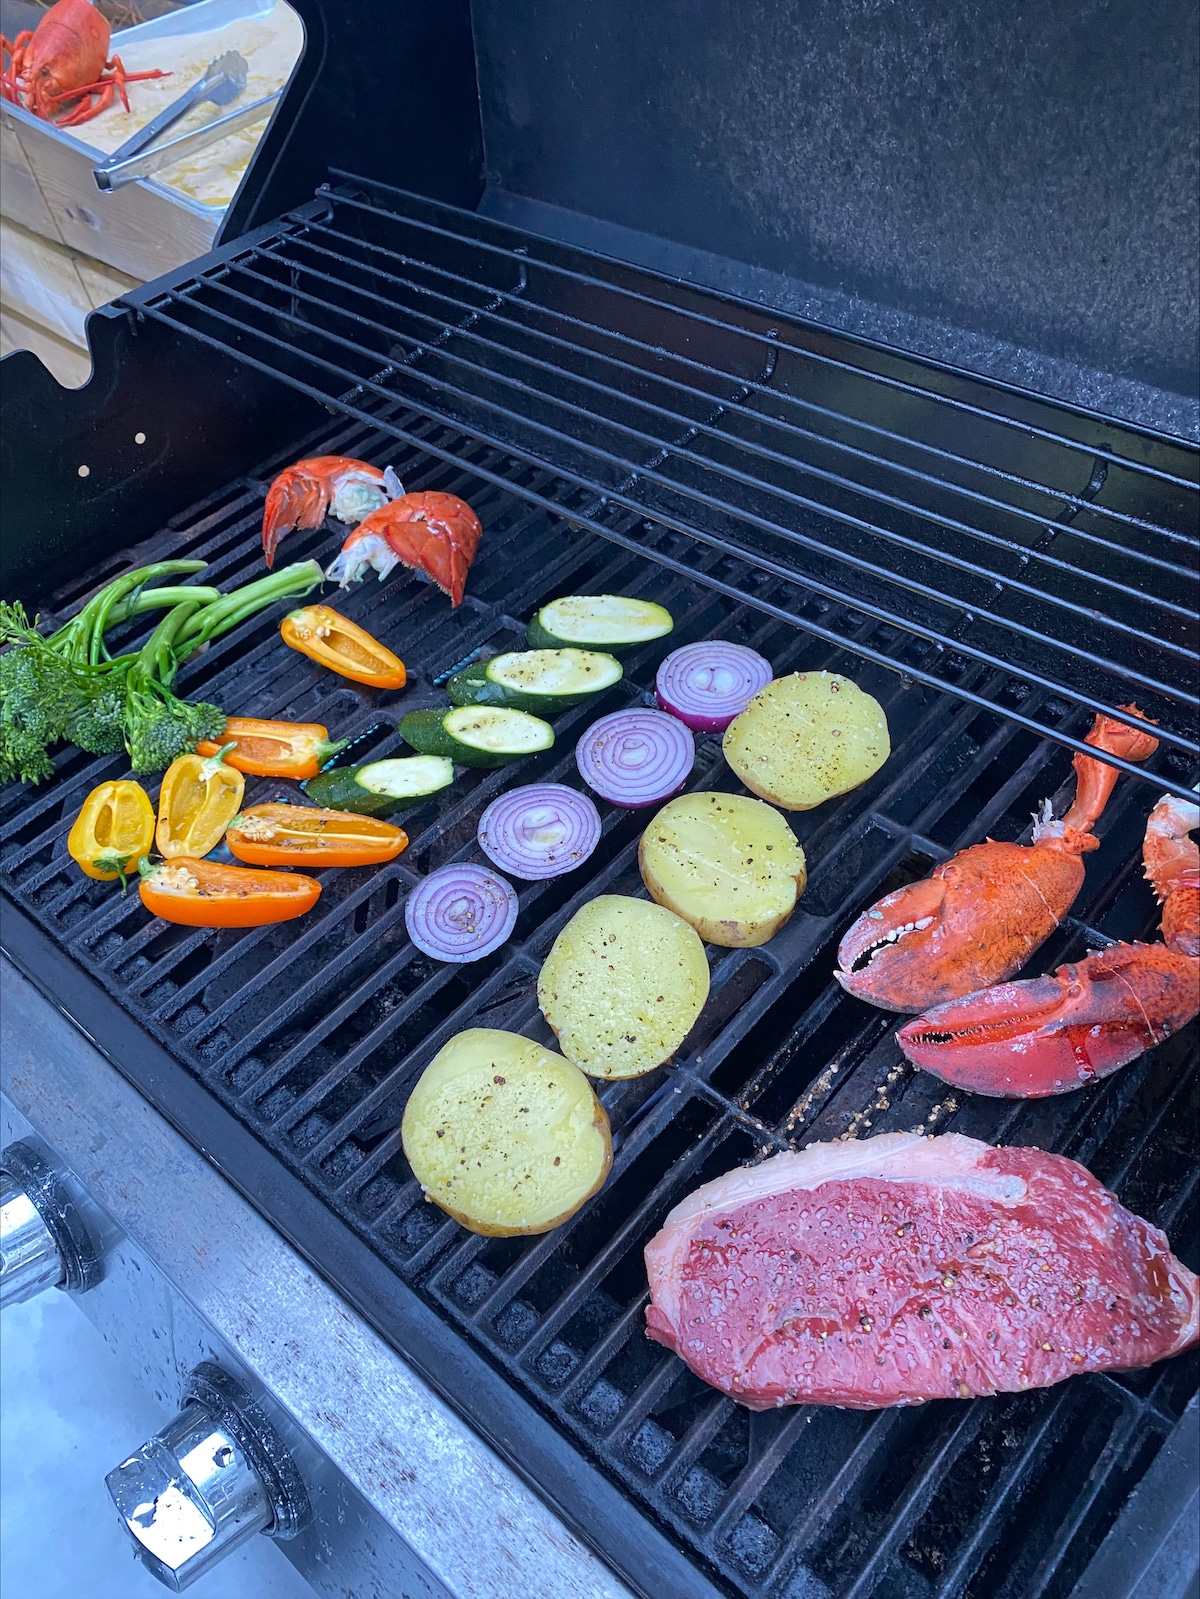 Surf & Turf Sharing Platter ingredients being placed on the grill